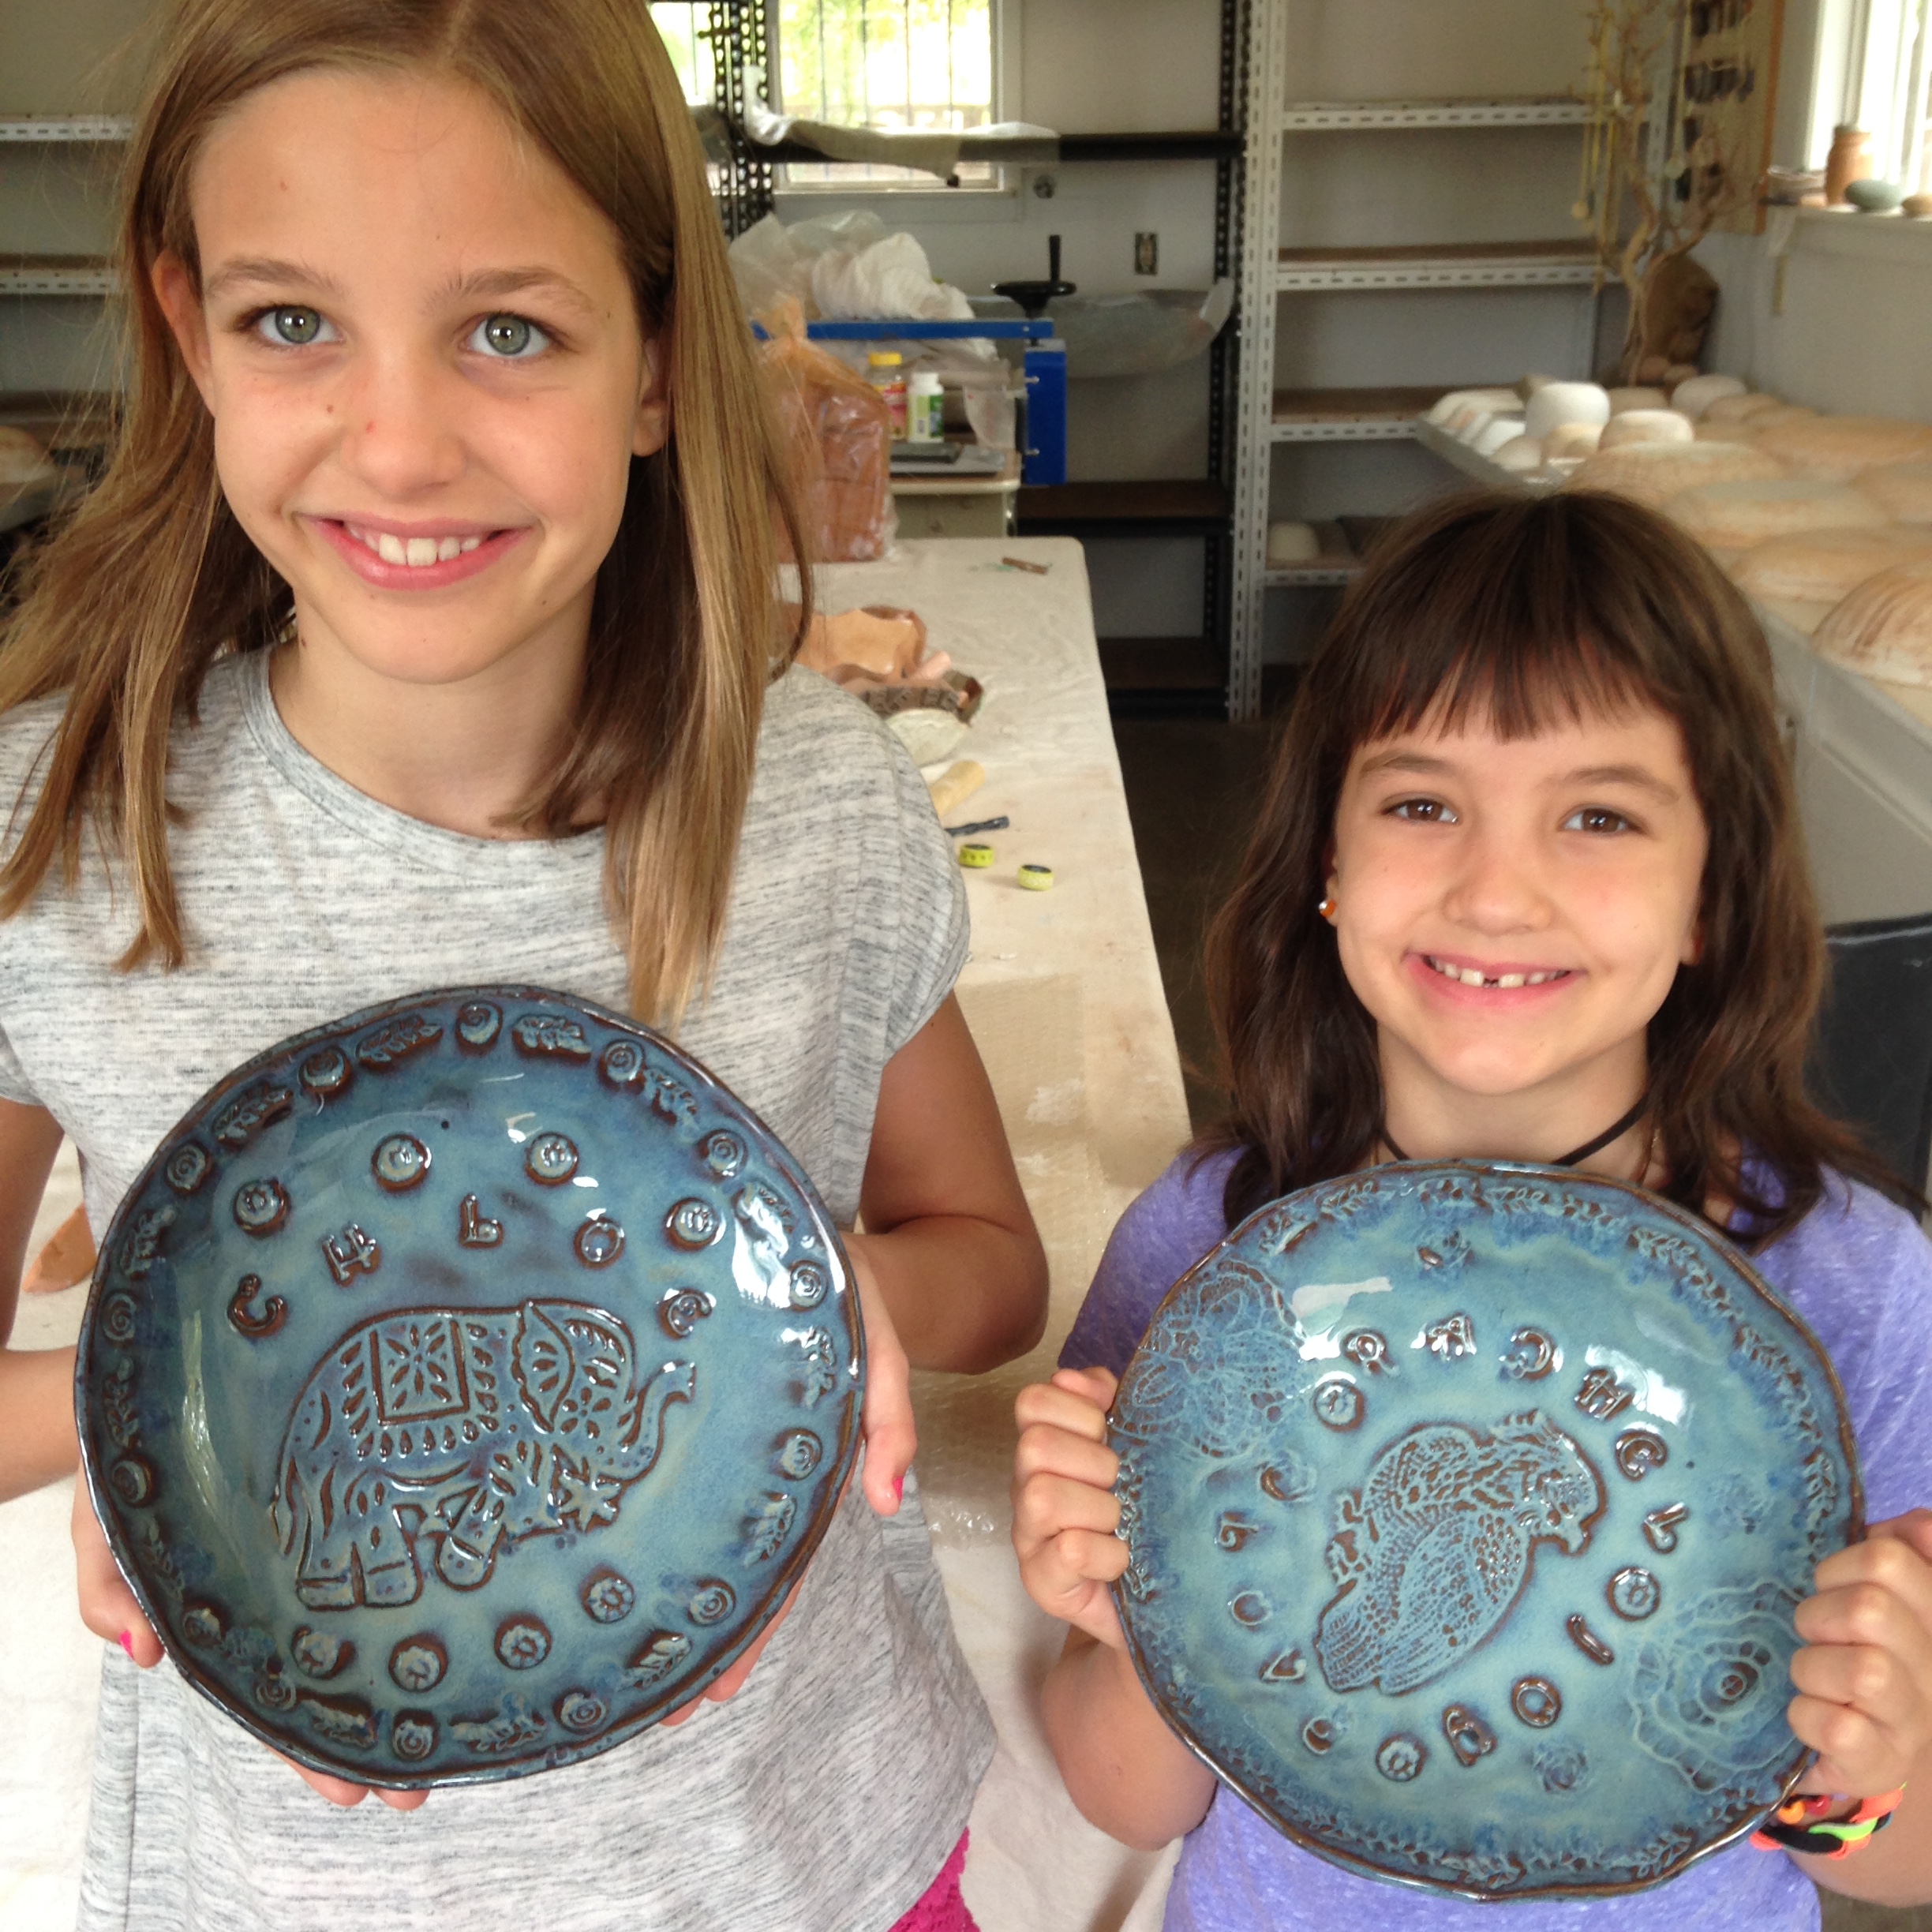 Chloe and Rachel made these amazing plates for them!